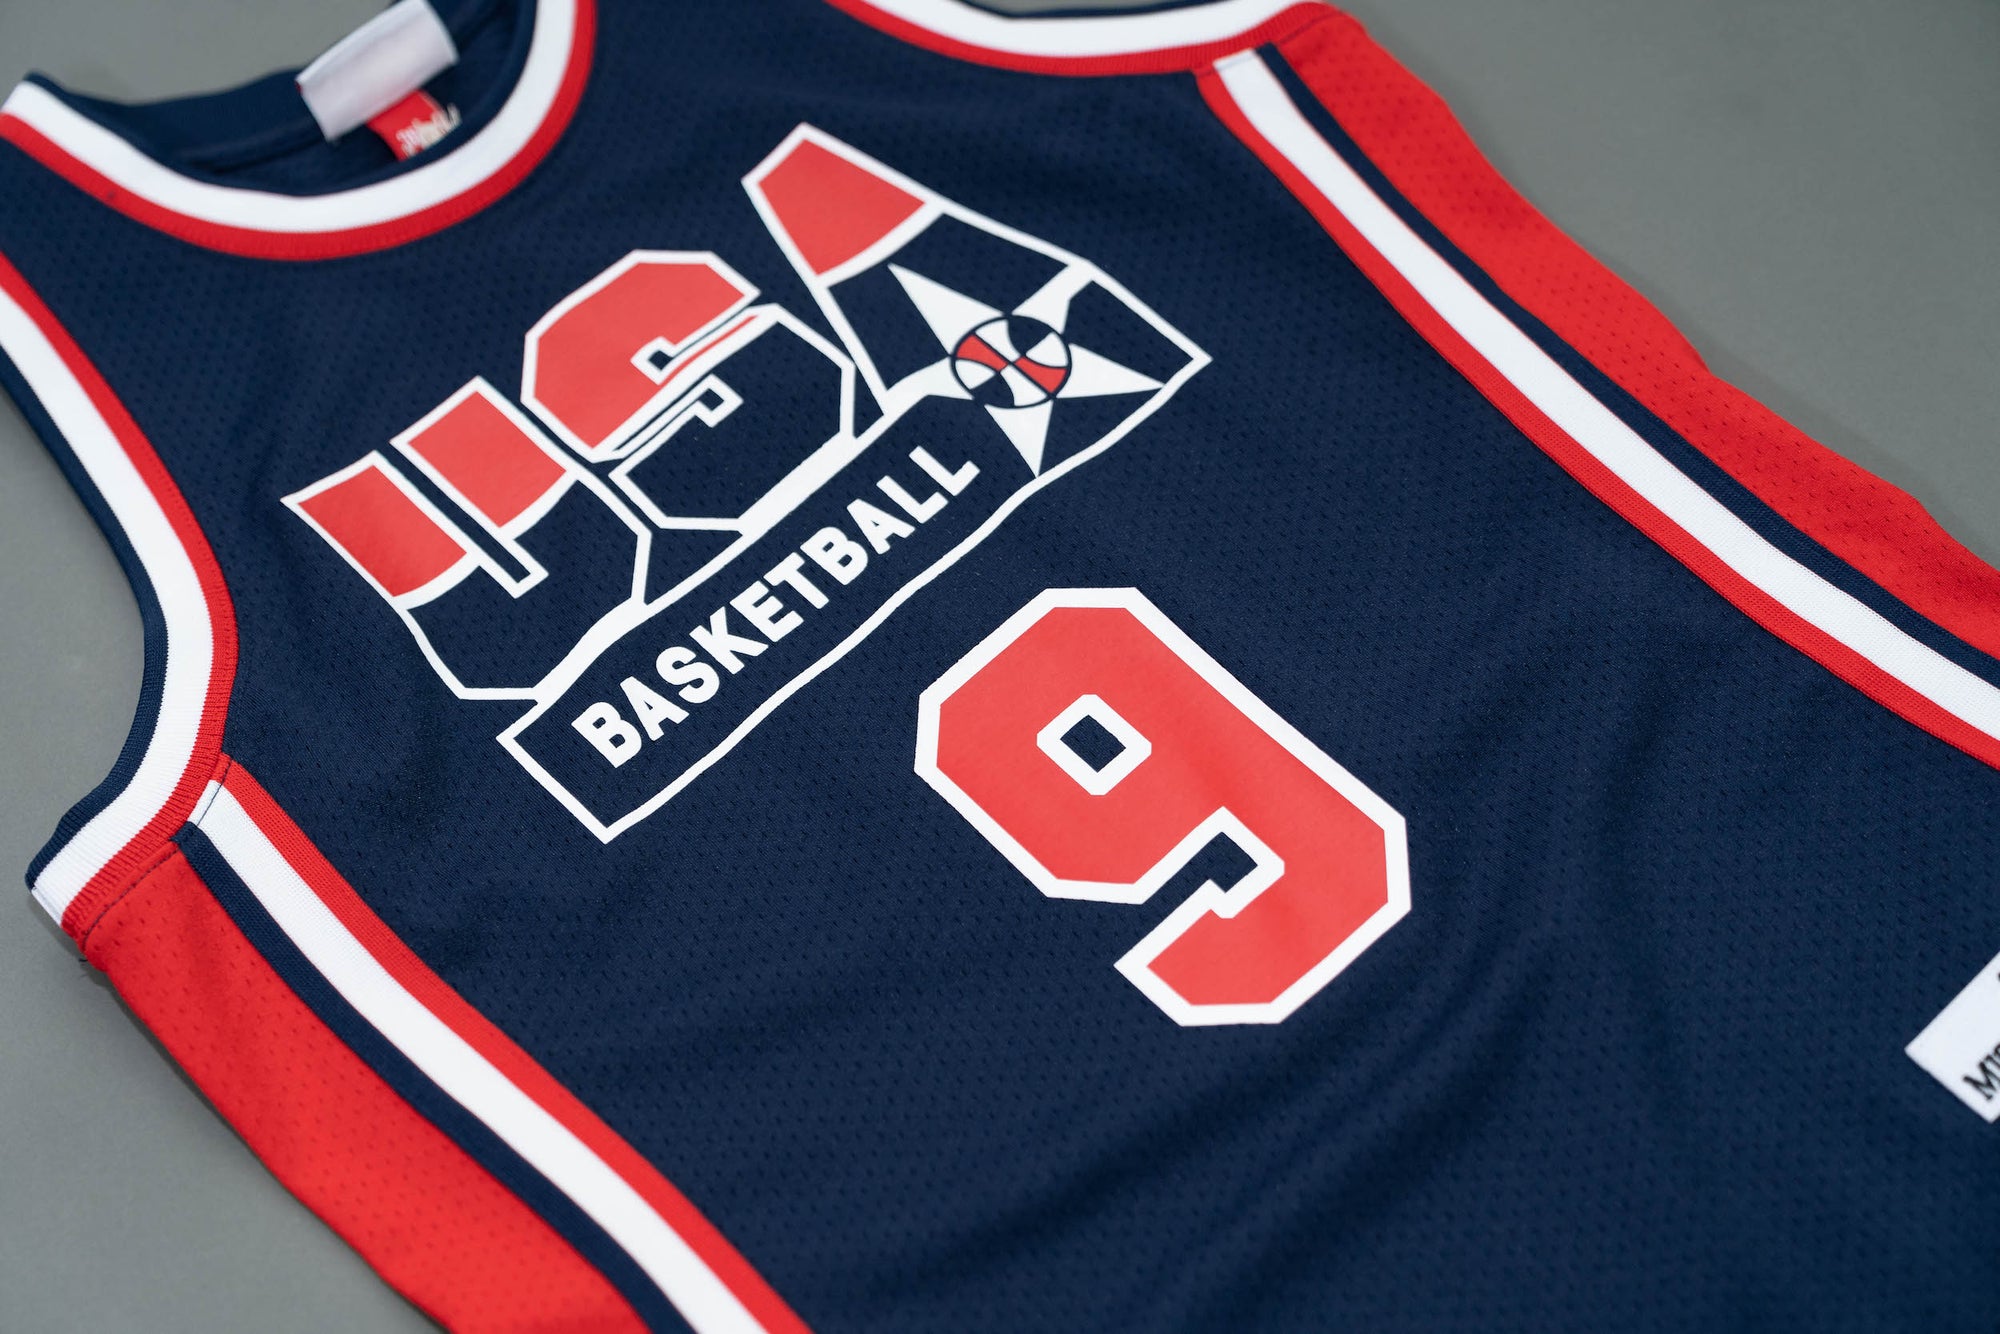 Nike Team USA (Home) Authentic Men's Basketball Jersey